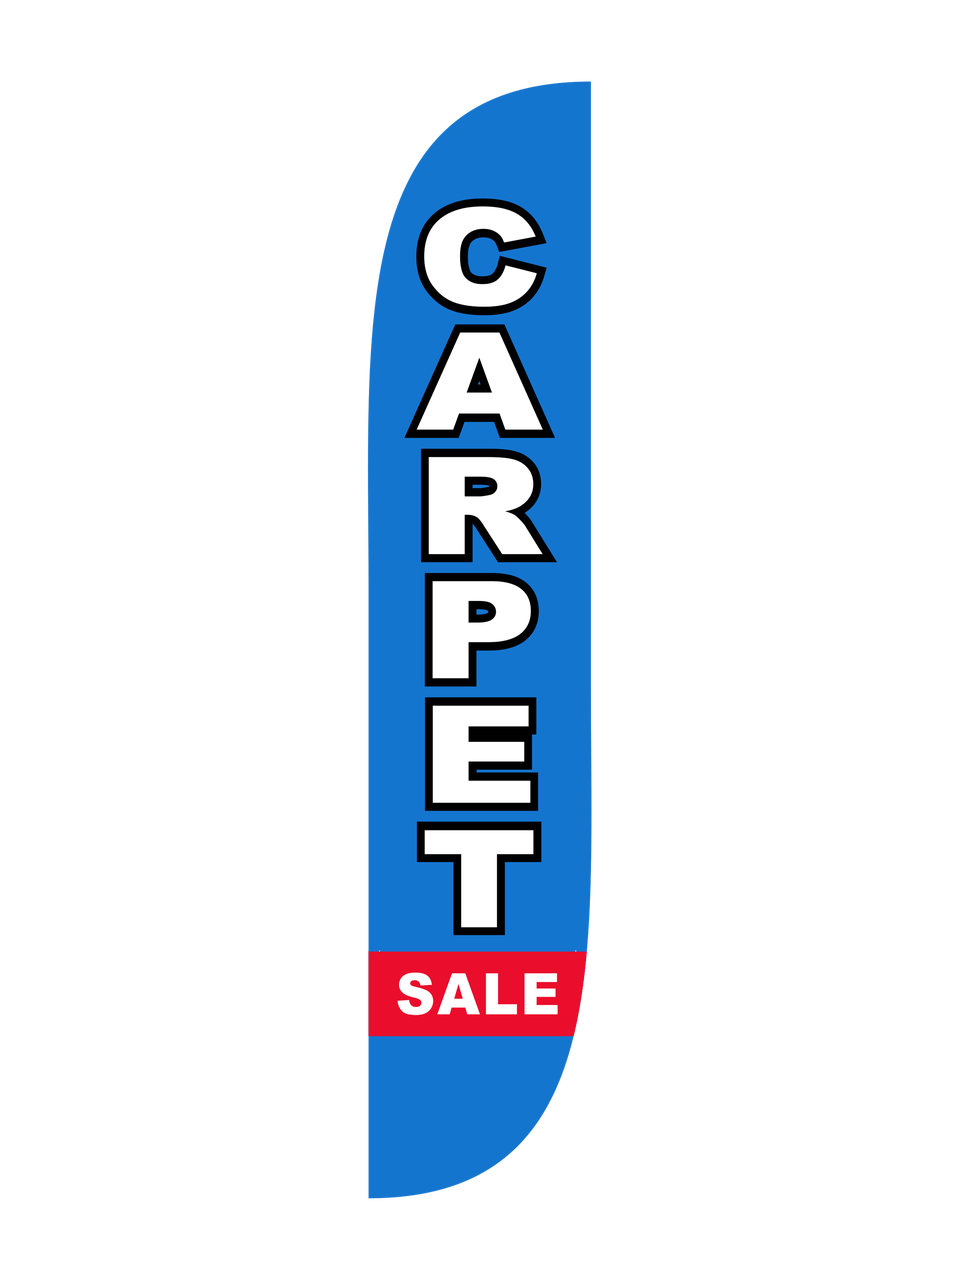 12ft Carpet Sale Feather Flag Blue & Red